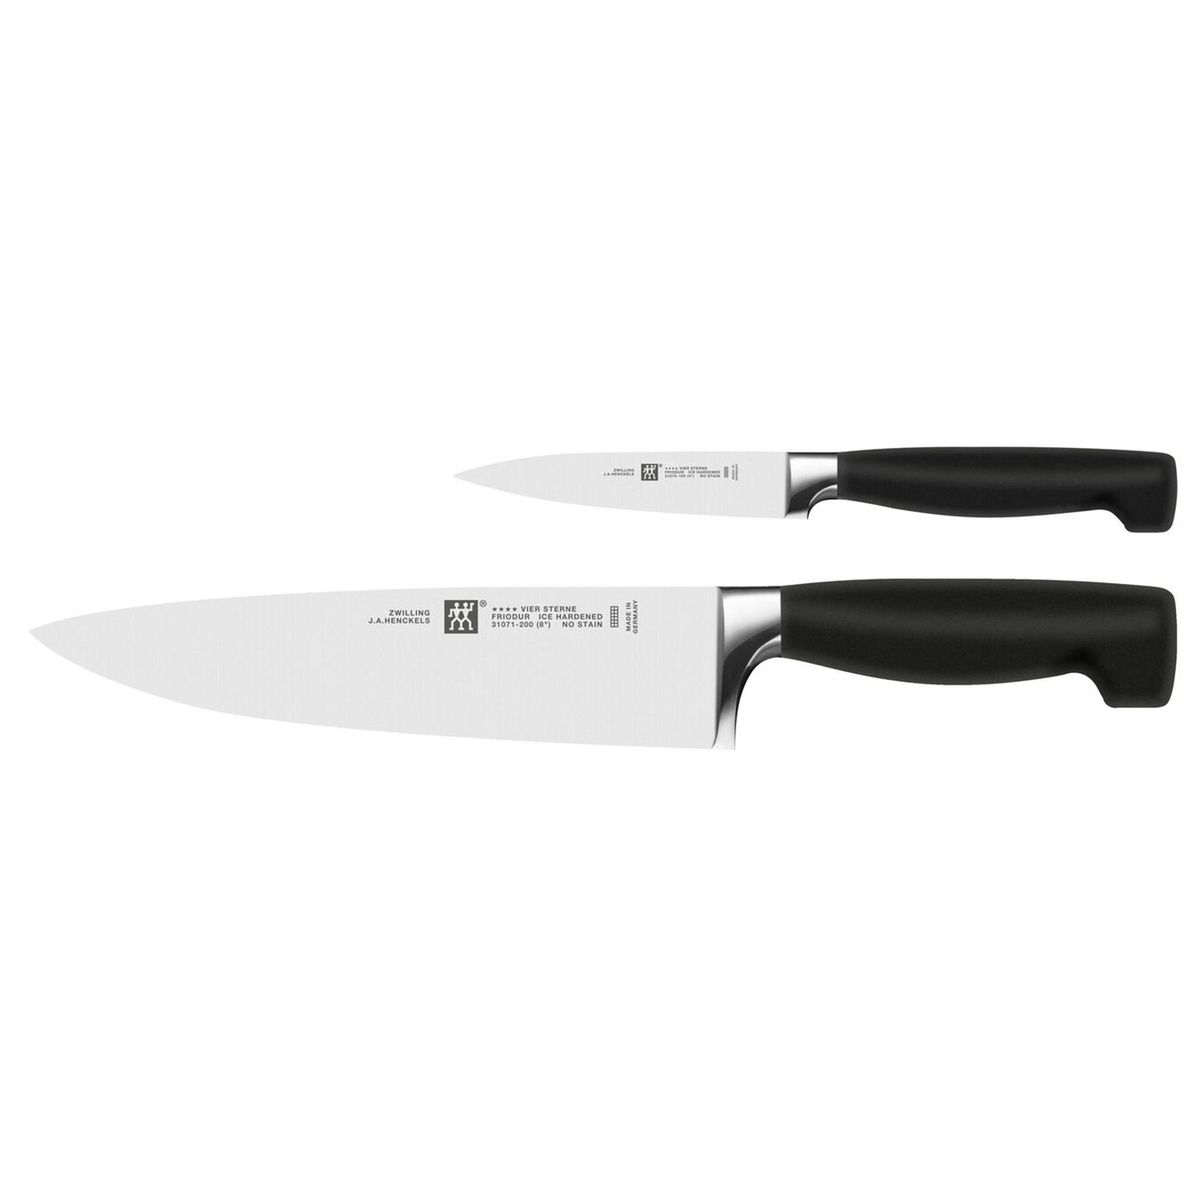 ZWILLING FOUR STAR 2-PC "THE MUST HAVES" KNIFE SET